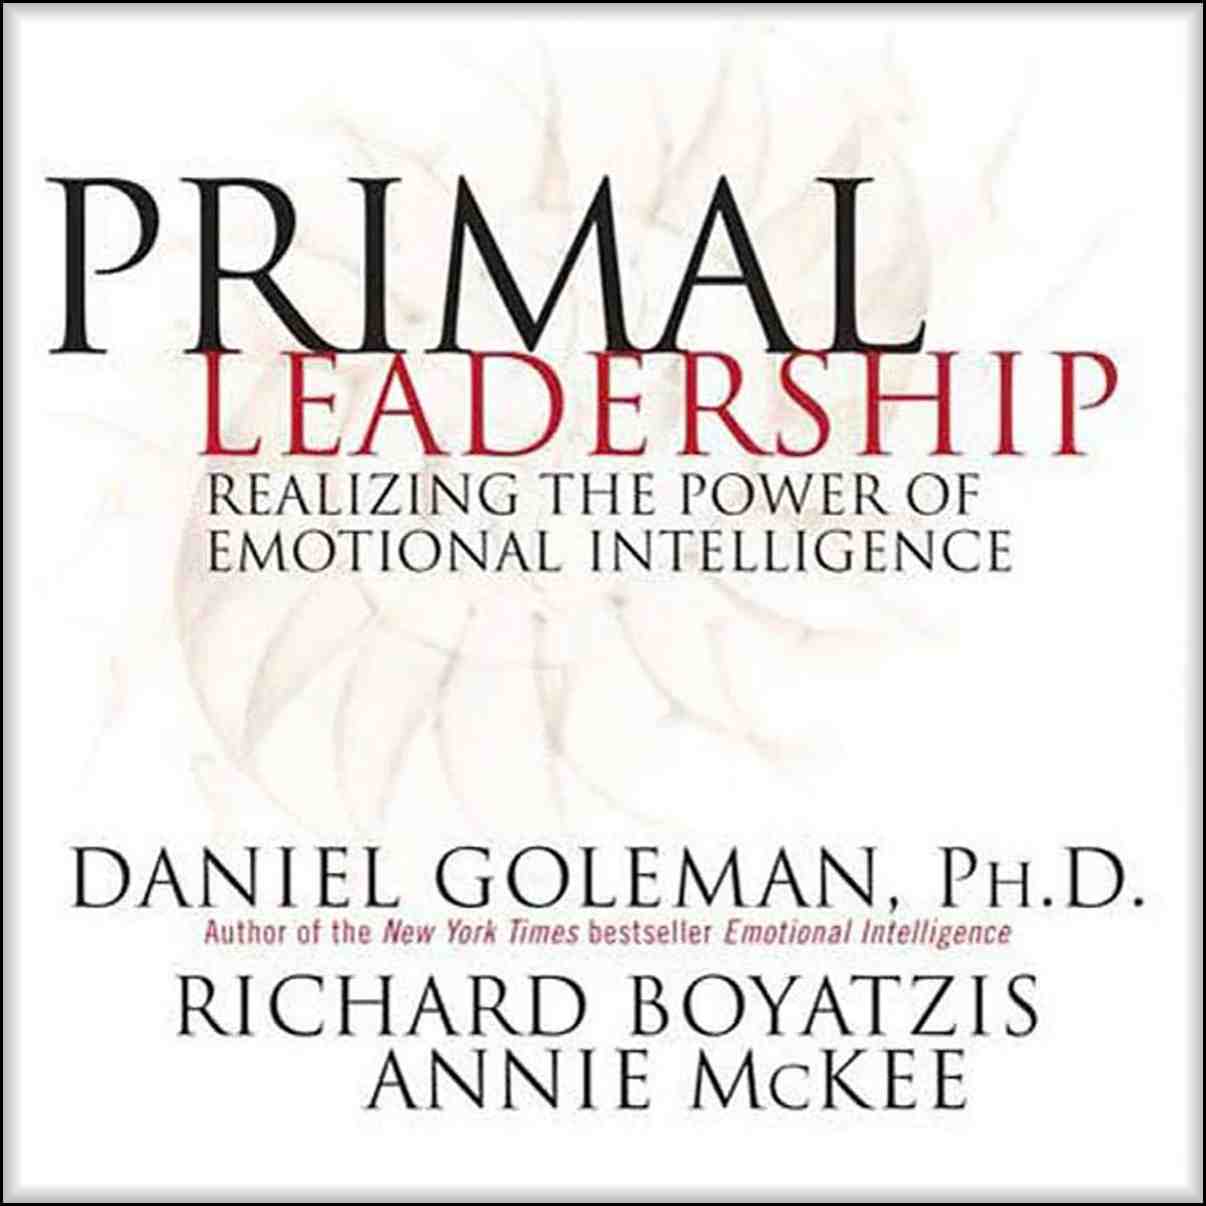 Primal Leadership - Acting As A Leader In A Way That Primes Positive Emotions In People. Picture of Daniel Goleman's book of that title.